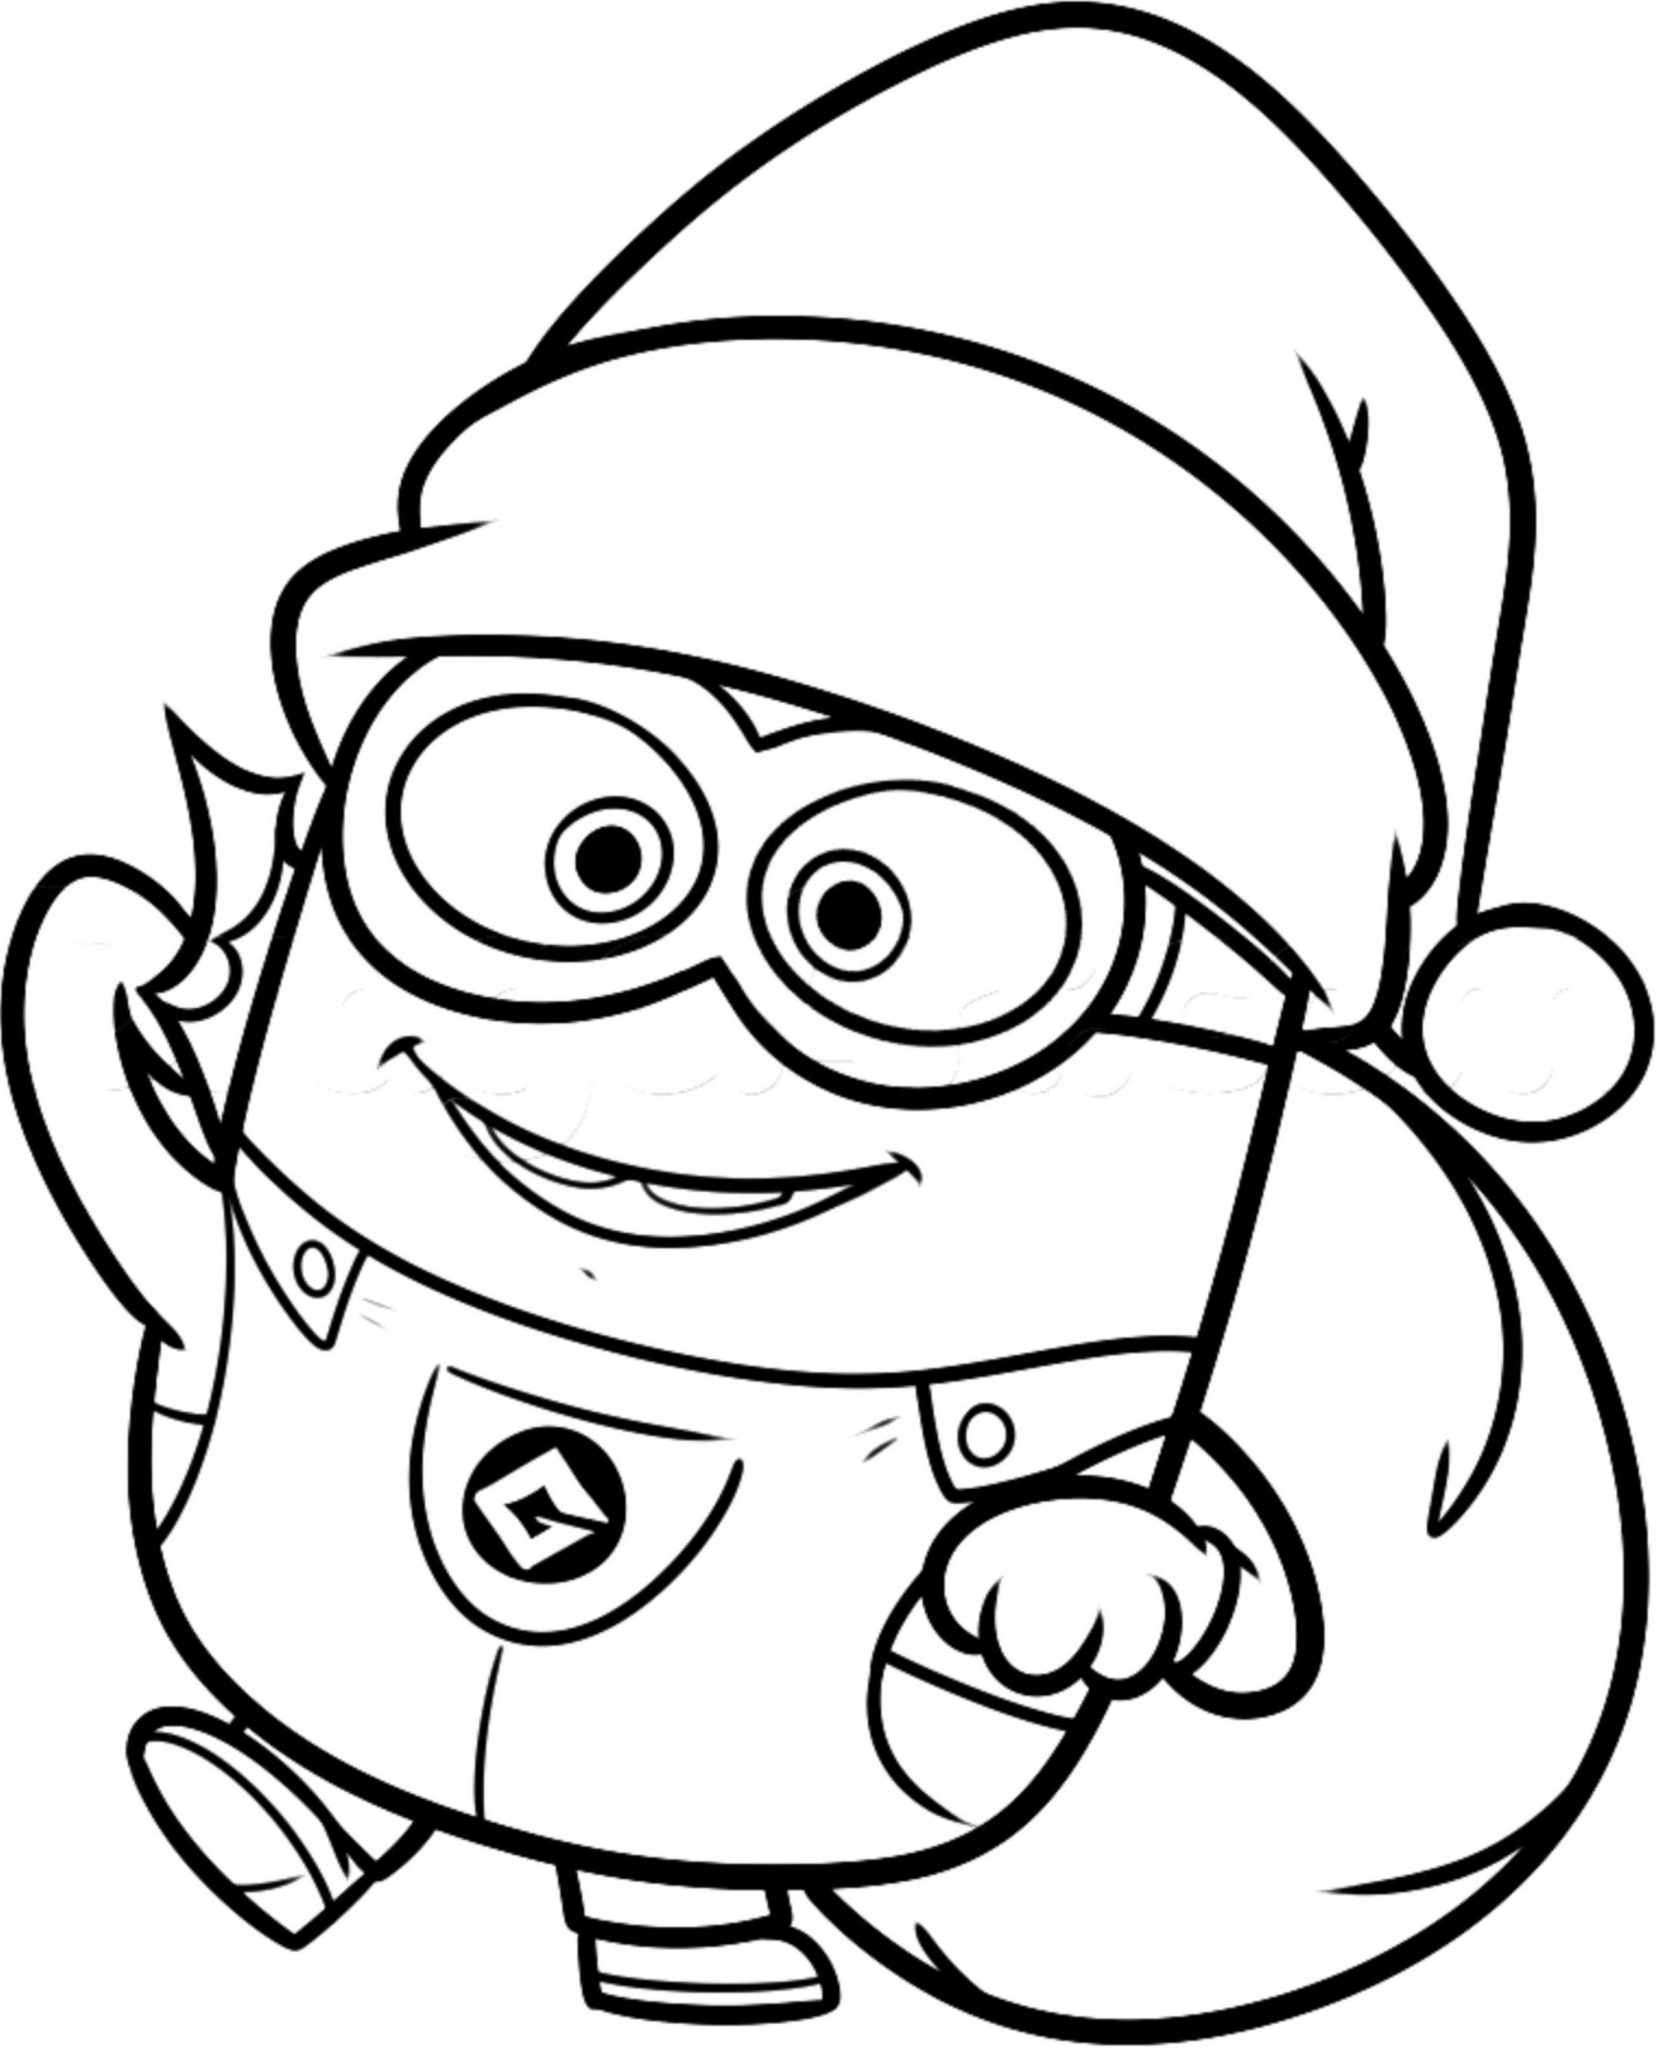 Print \u0026 Download  Minion Coloring Pages for Kids to Have Fun